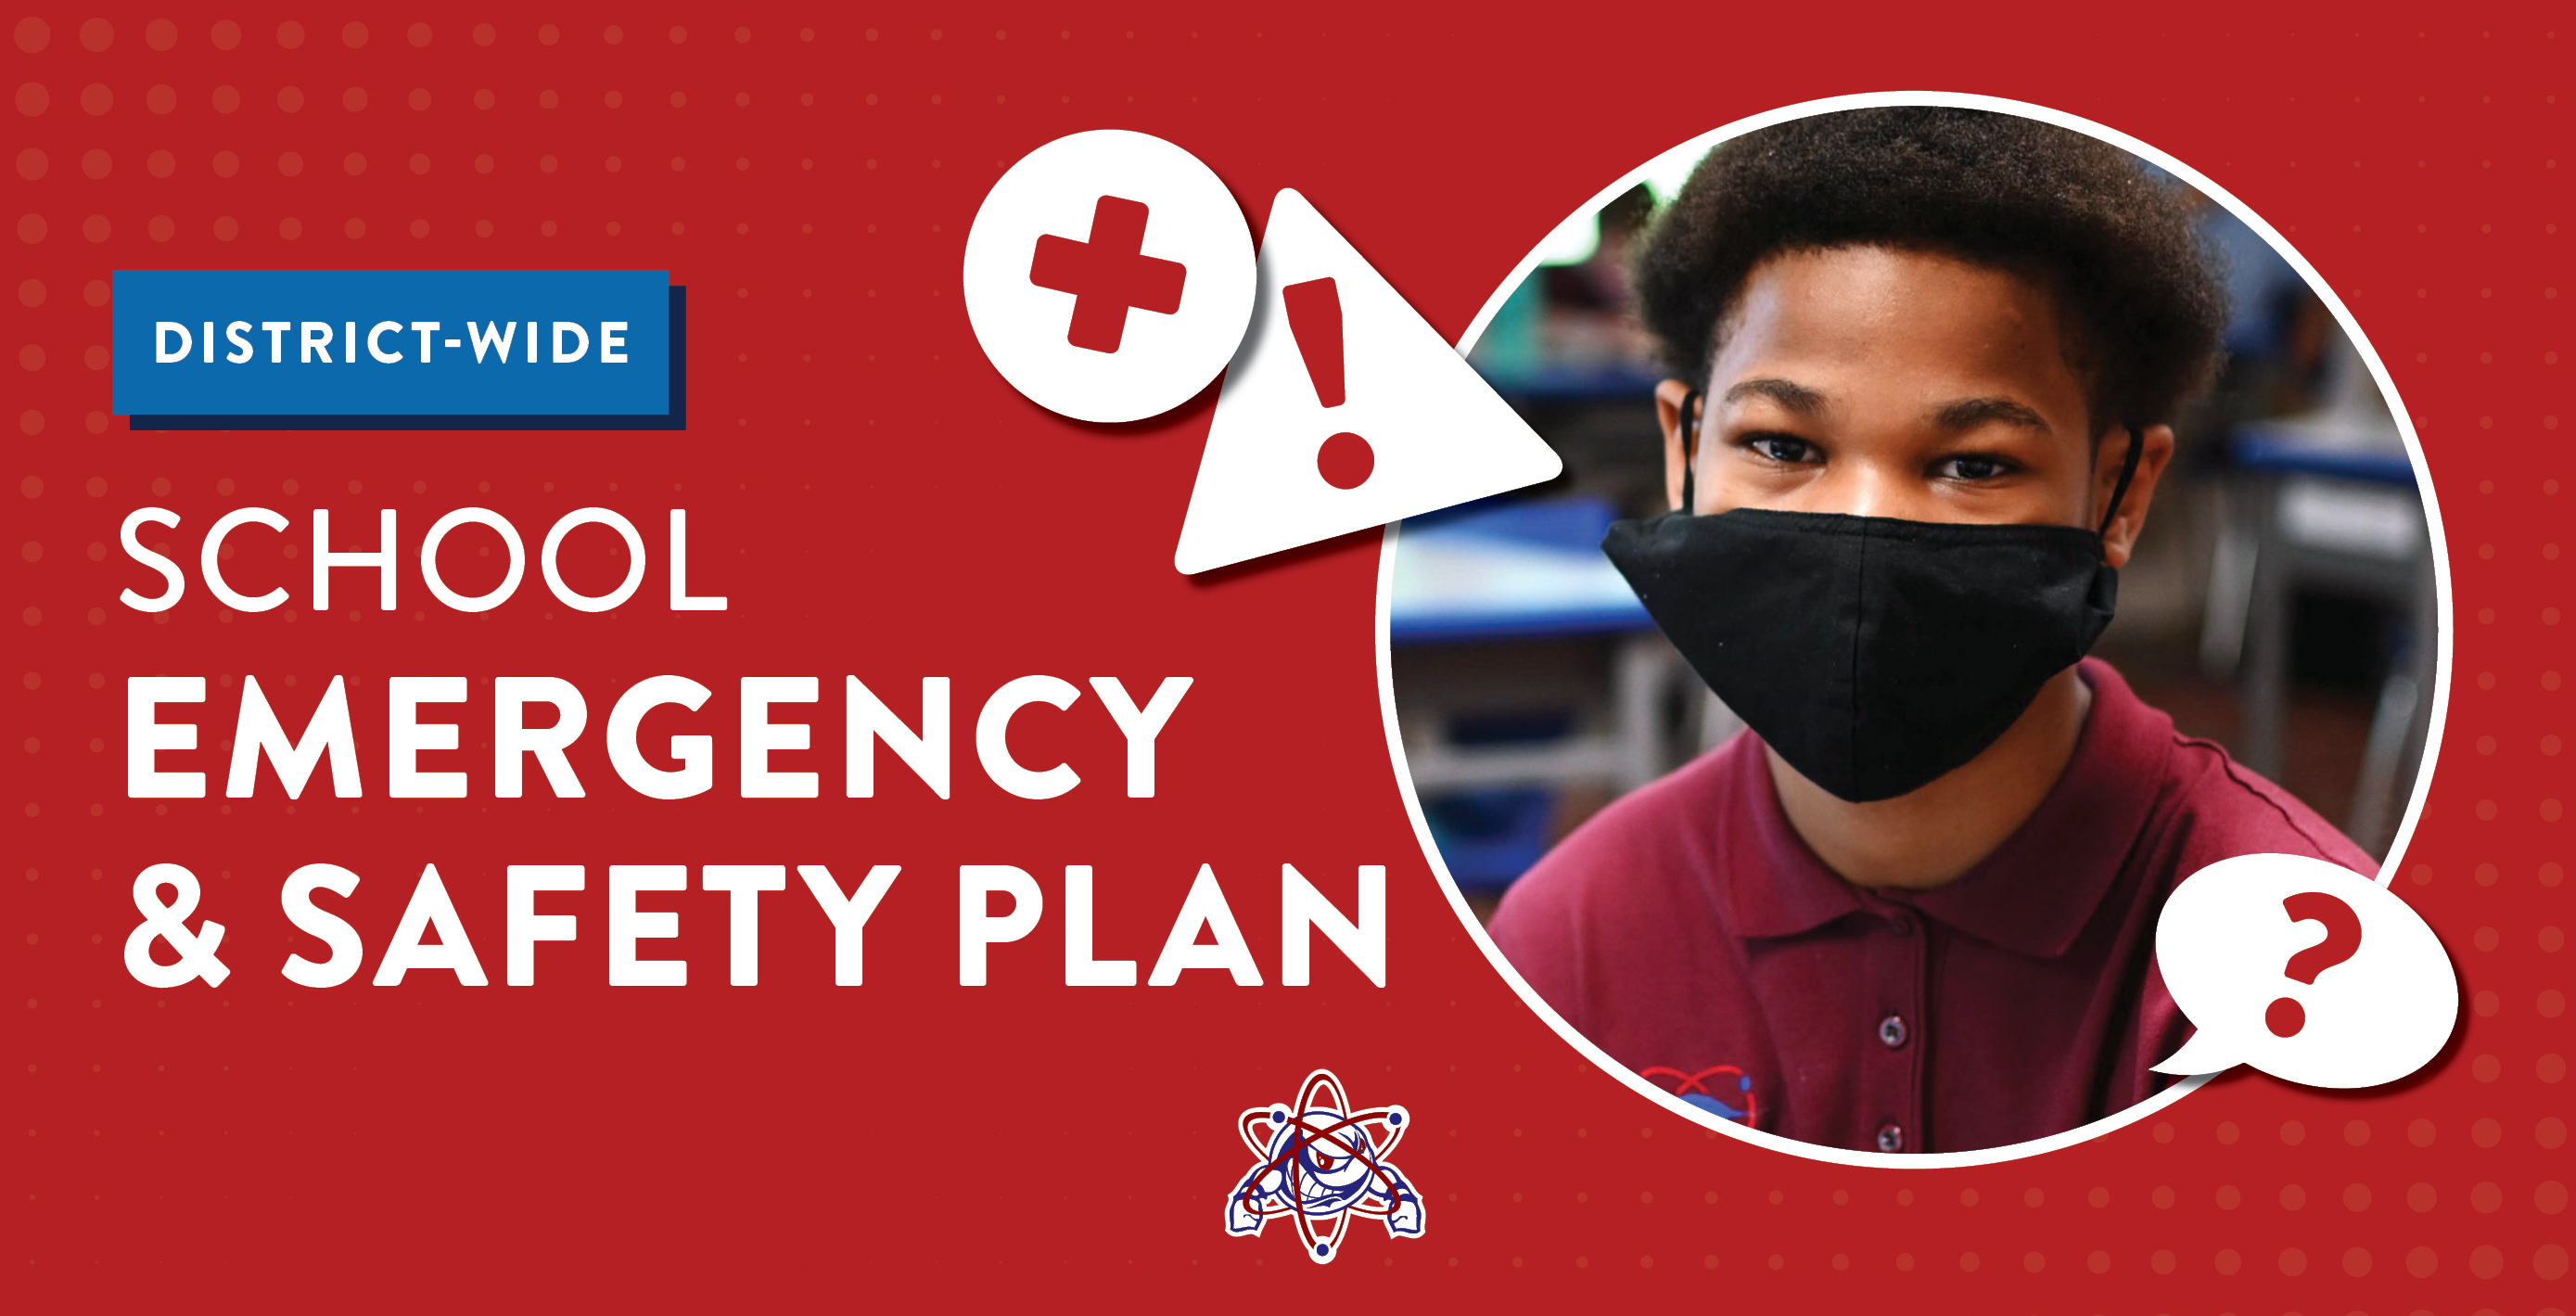 On Monday, August 9th, SANY will be hosting a District-Wide School Emergency and Safety Plan public hearing to share its safety plans and measures that will be in place for this upcoming 2021 - 2022 school year.